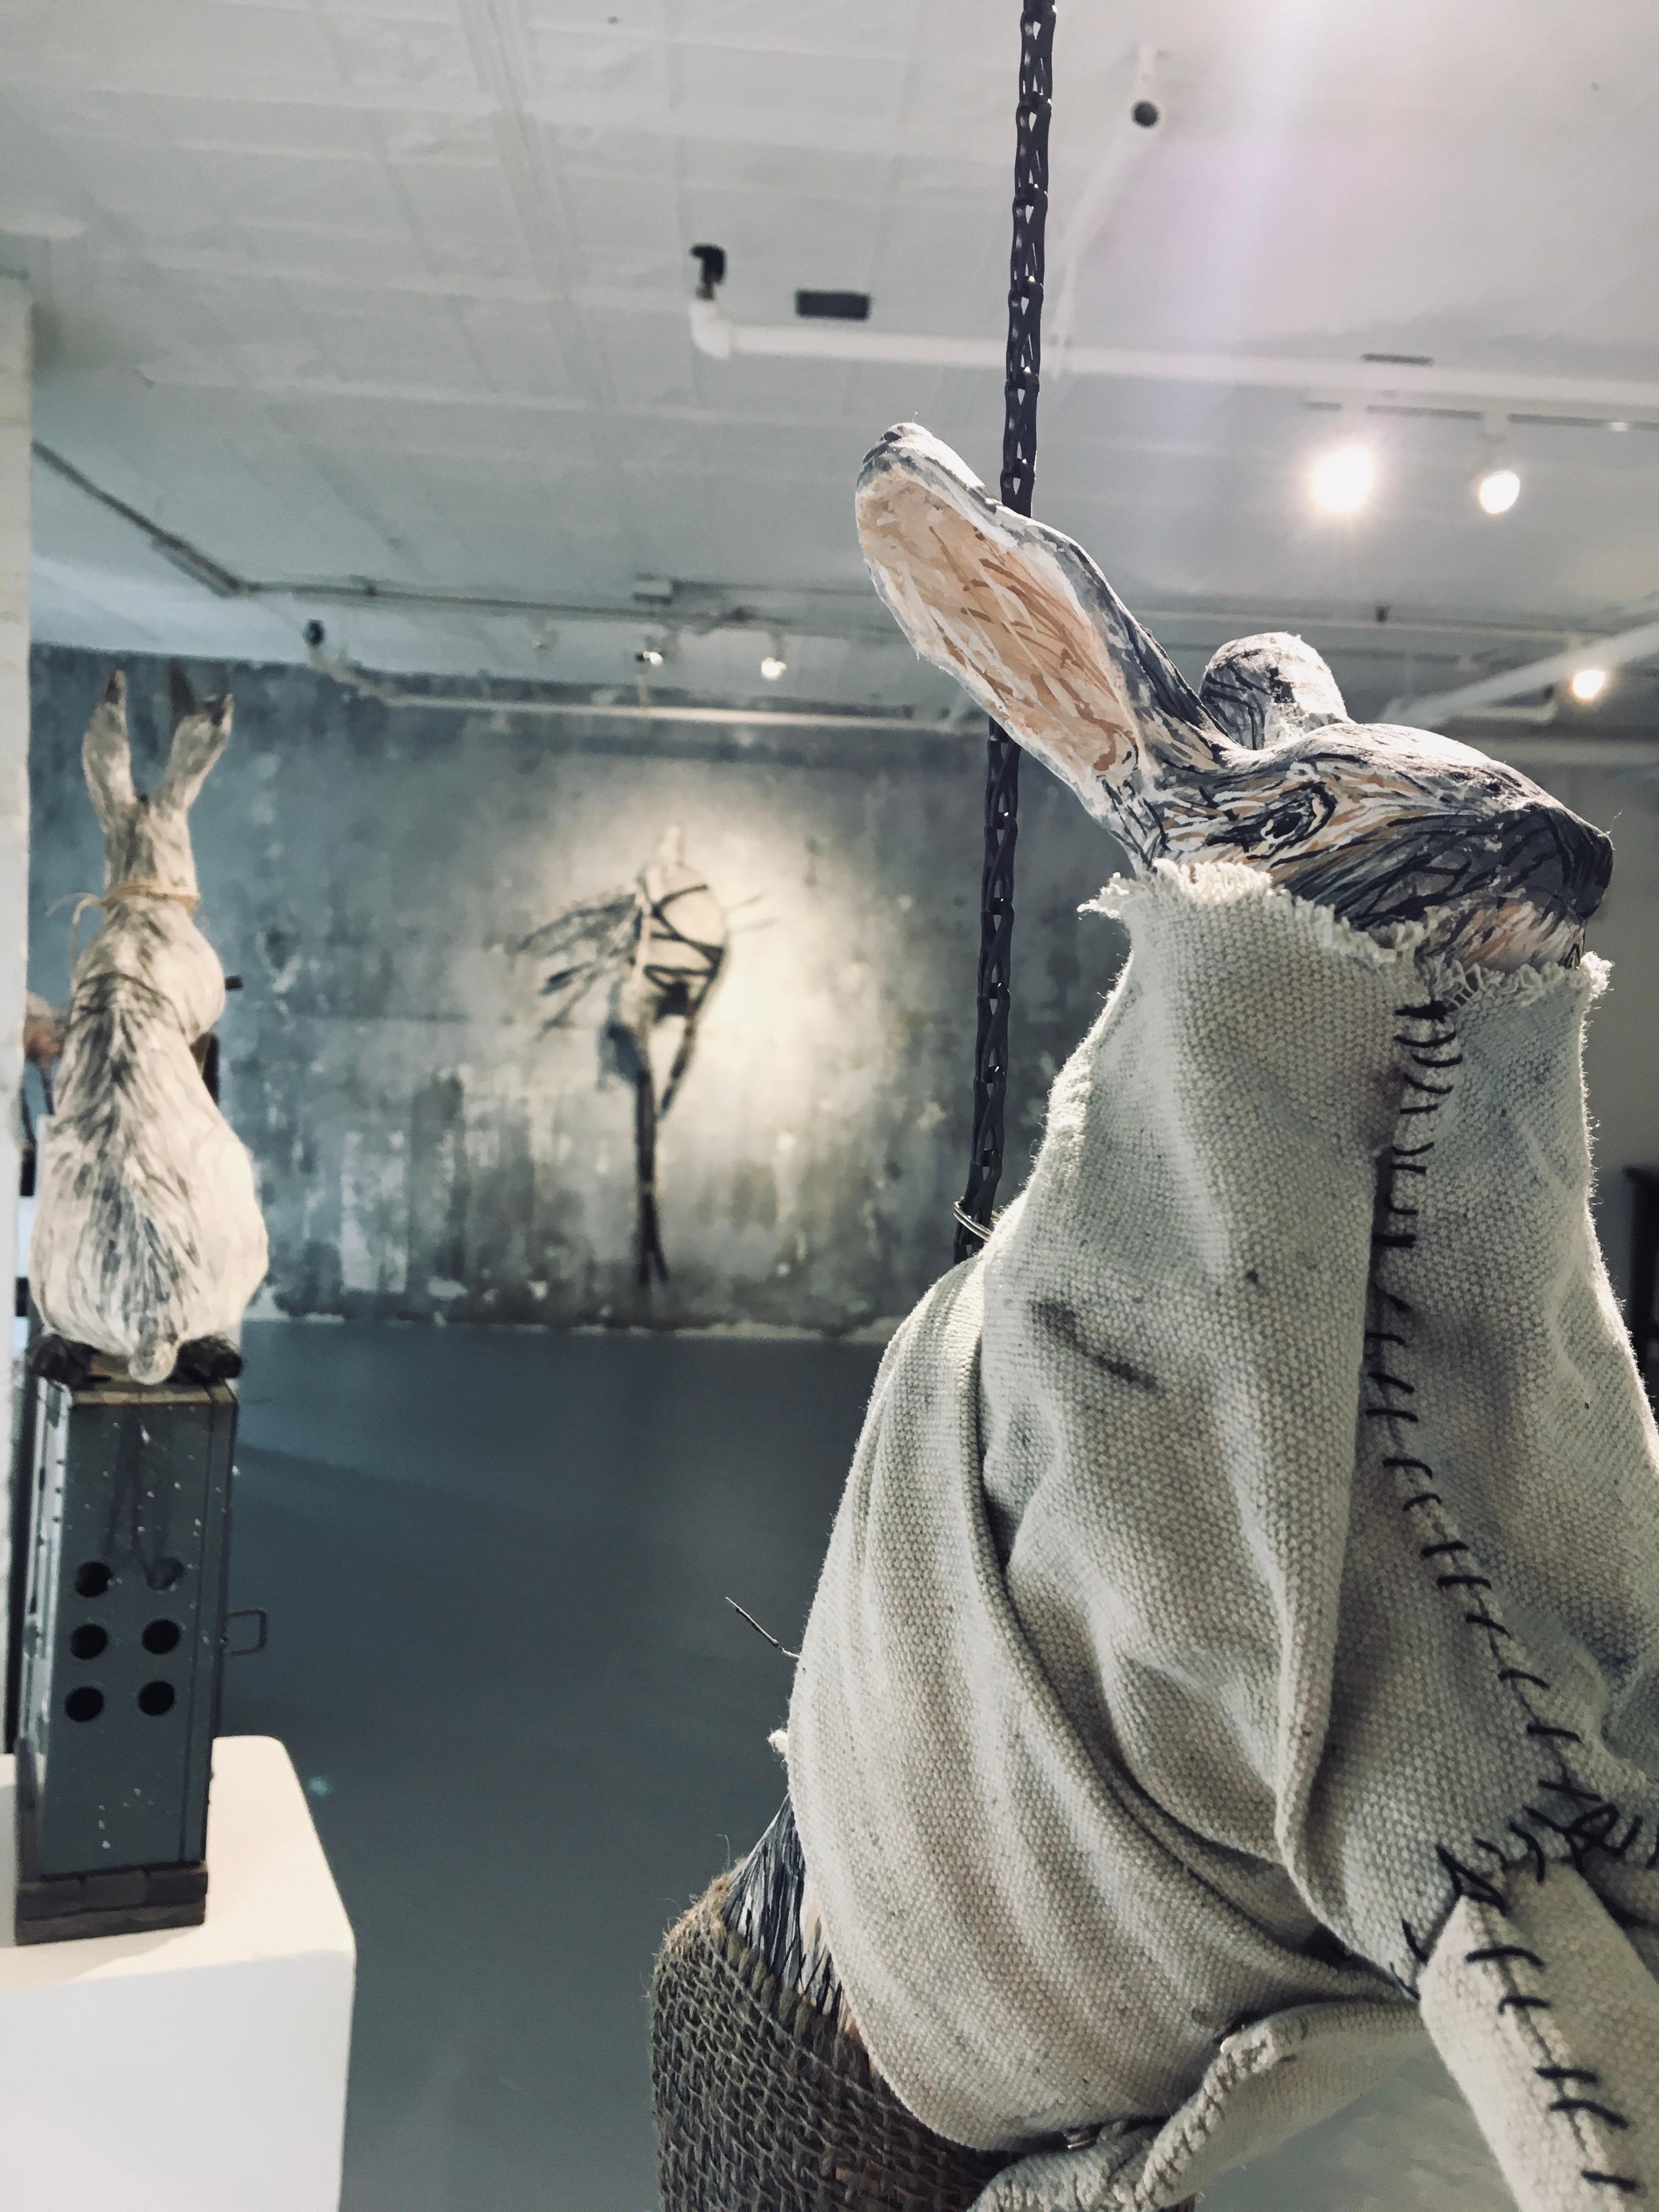 Sculpture of hare suspended from chain: 'Children 4' - Contemporary Mixed Media Art by Elizabeth Jordan